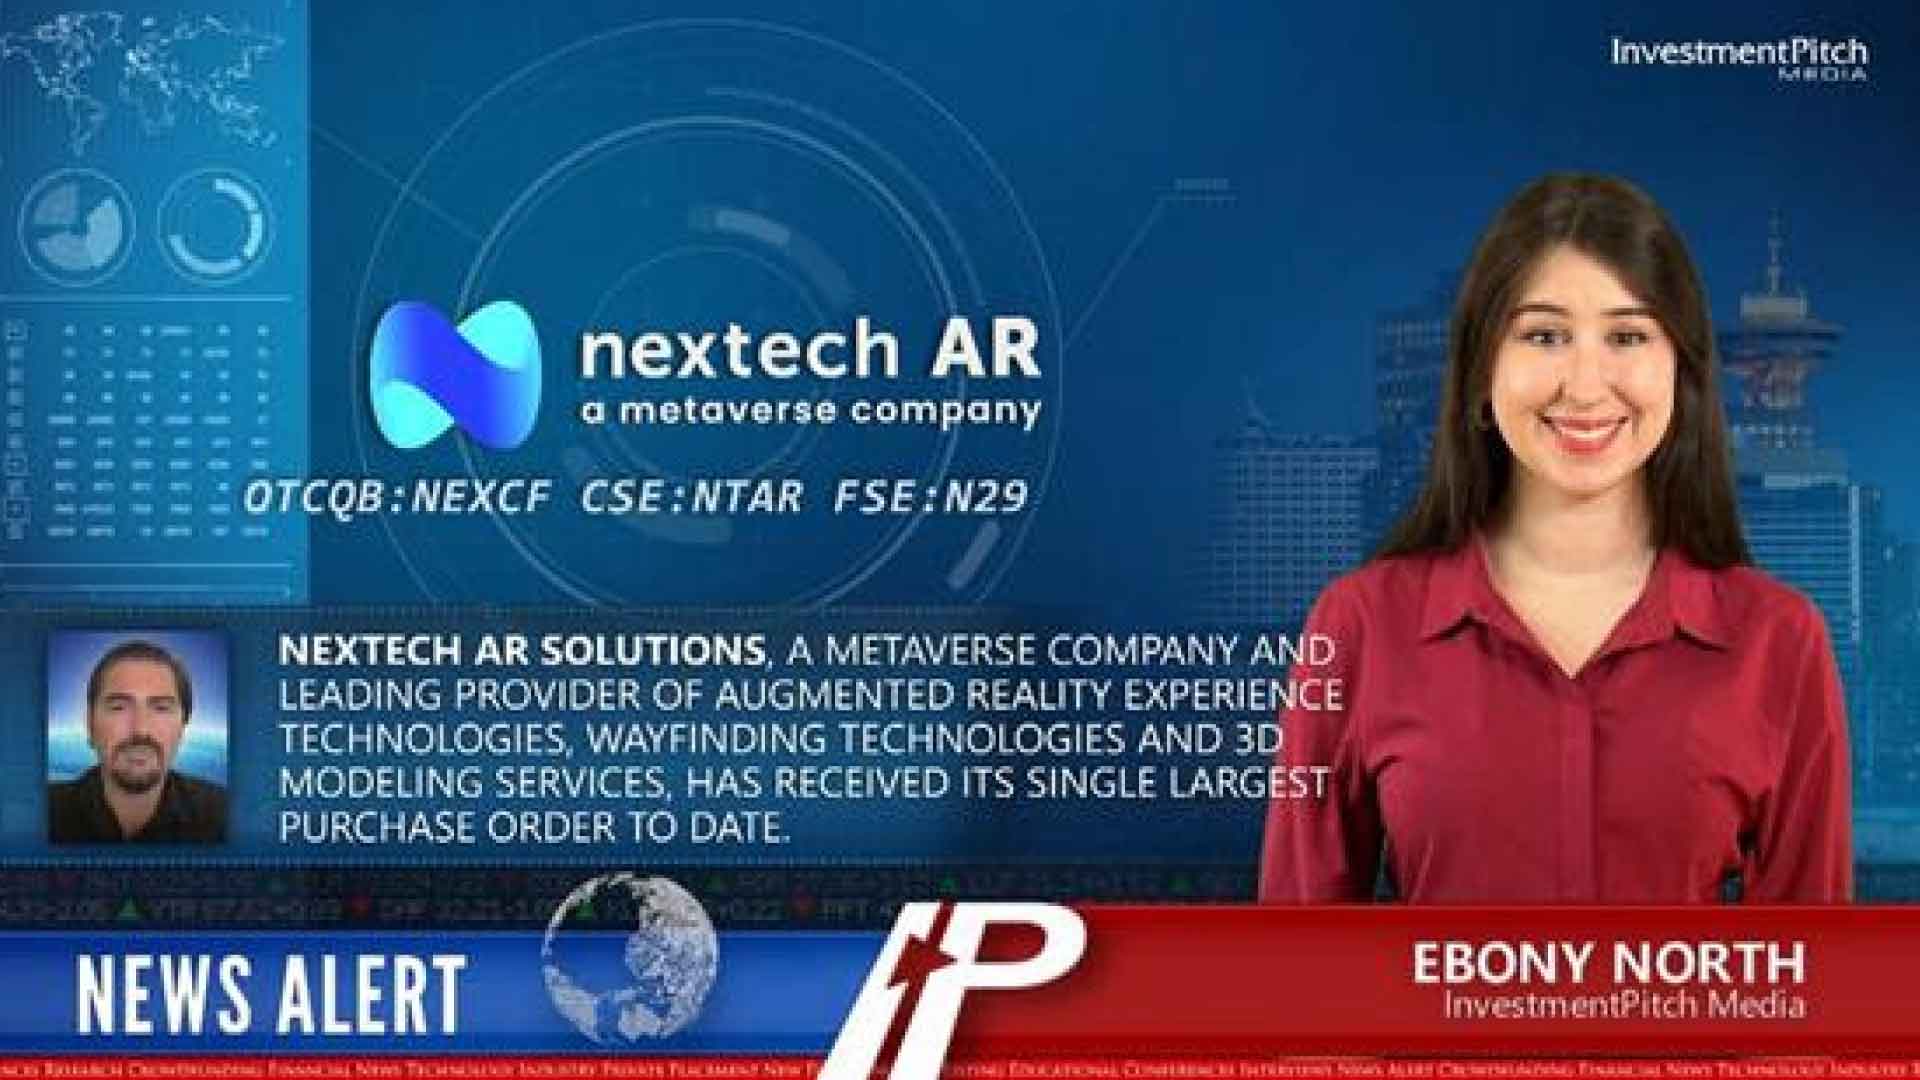 InvestmentPitch Media Video Discusses Nextech AR Solutions’ Record $6.7 million 3D Model Purchase Order from NASDAQ 100 Tech Company